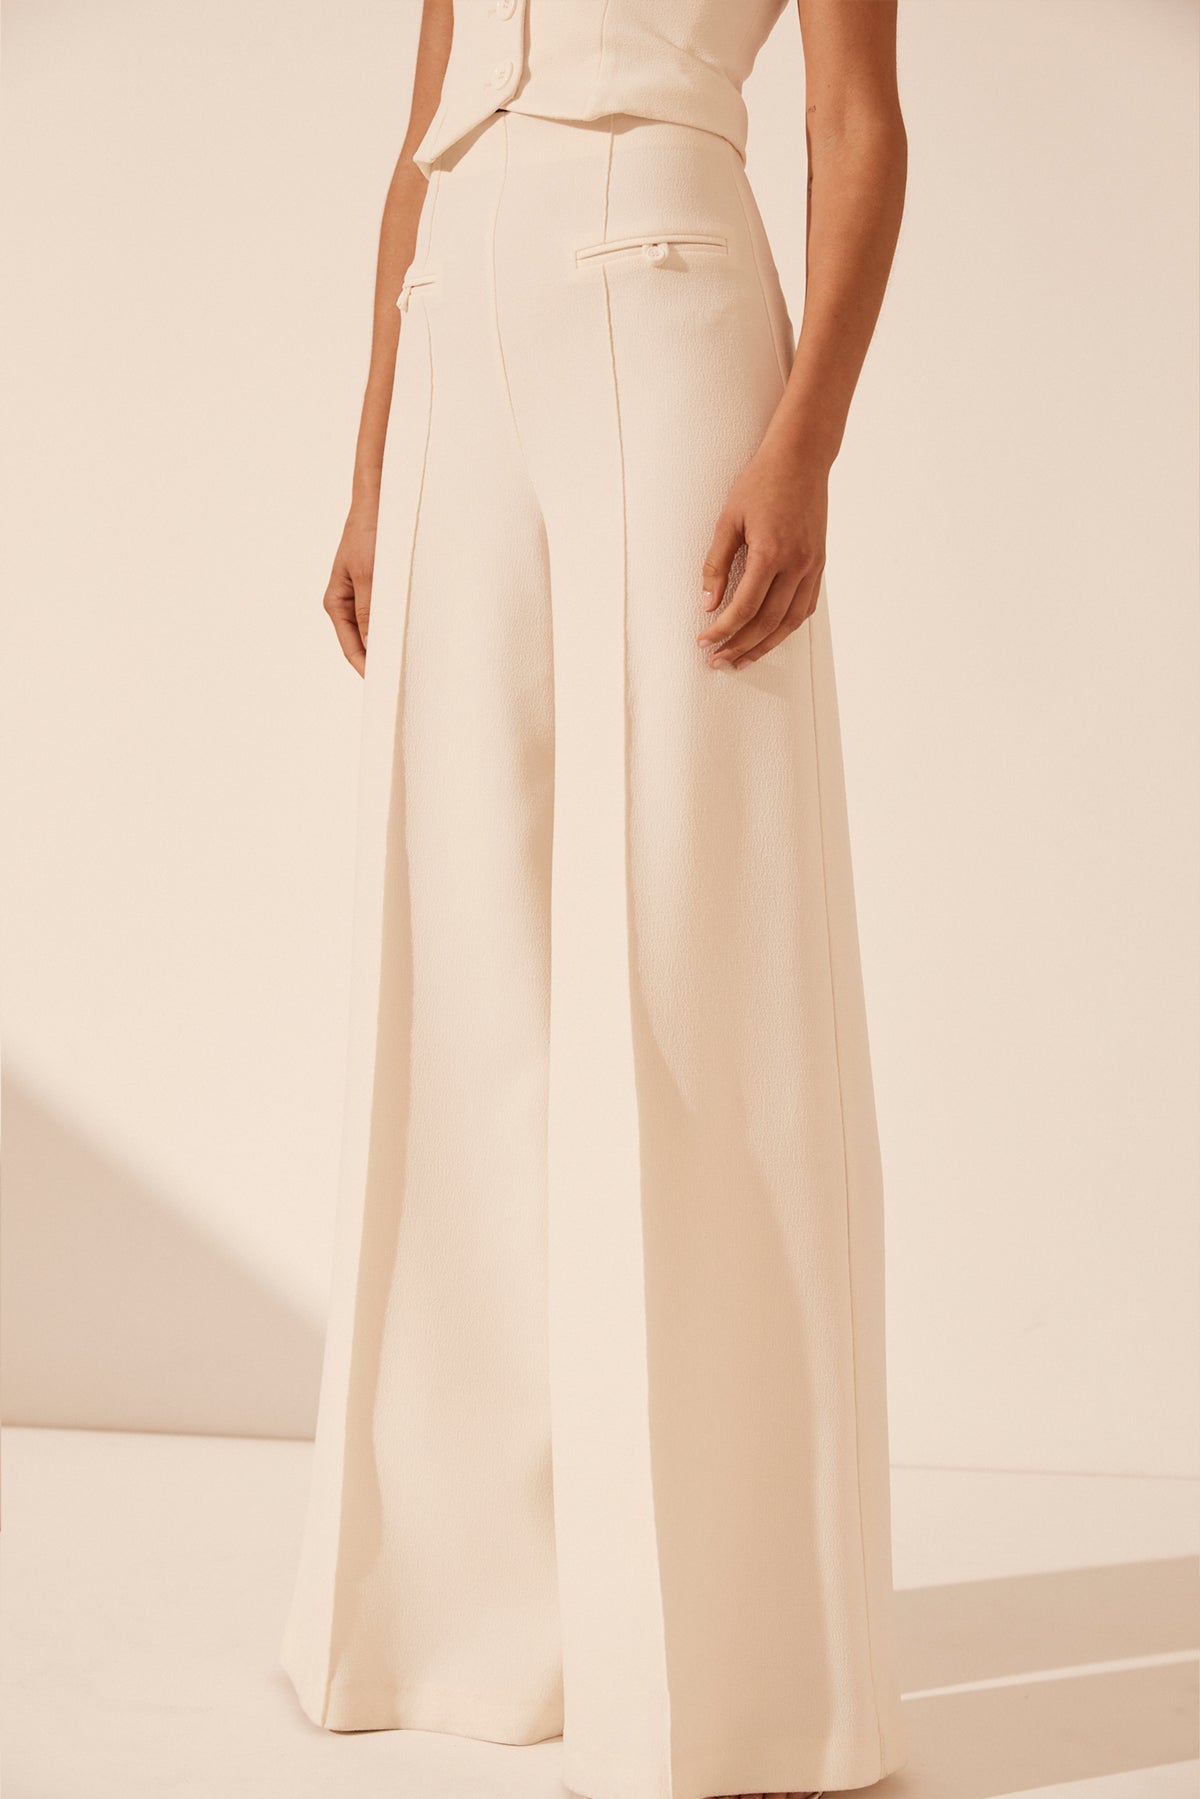 Friends with Frank Wide Leg Trouser in Ivory – Coco & Lola